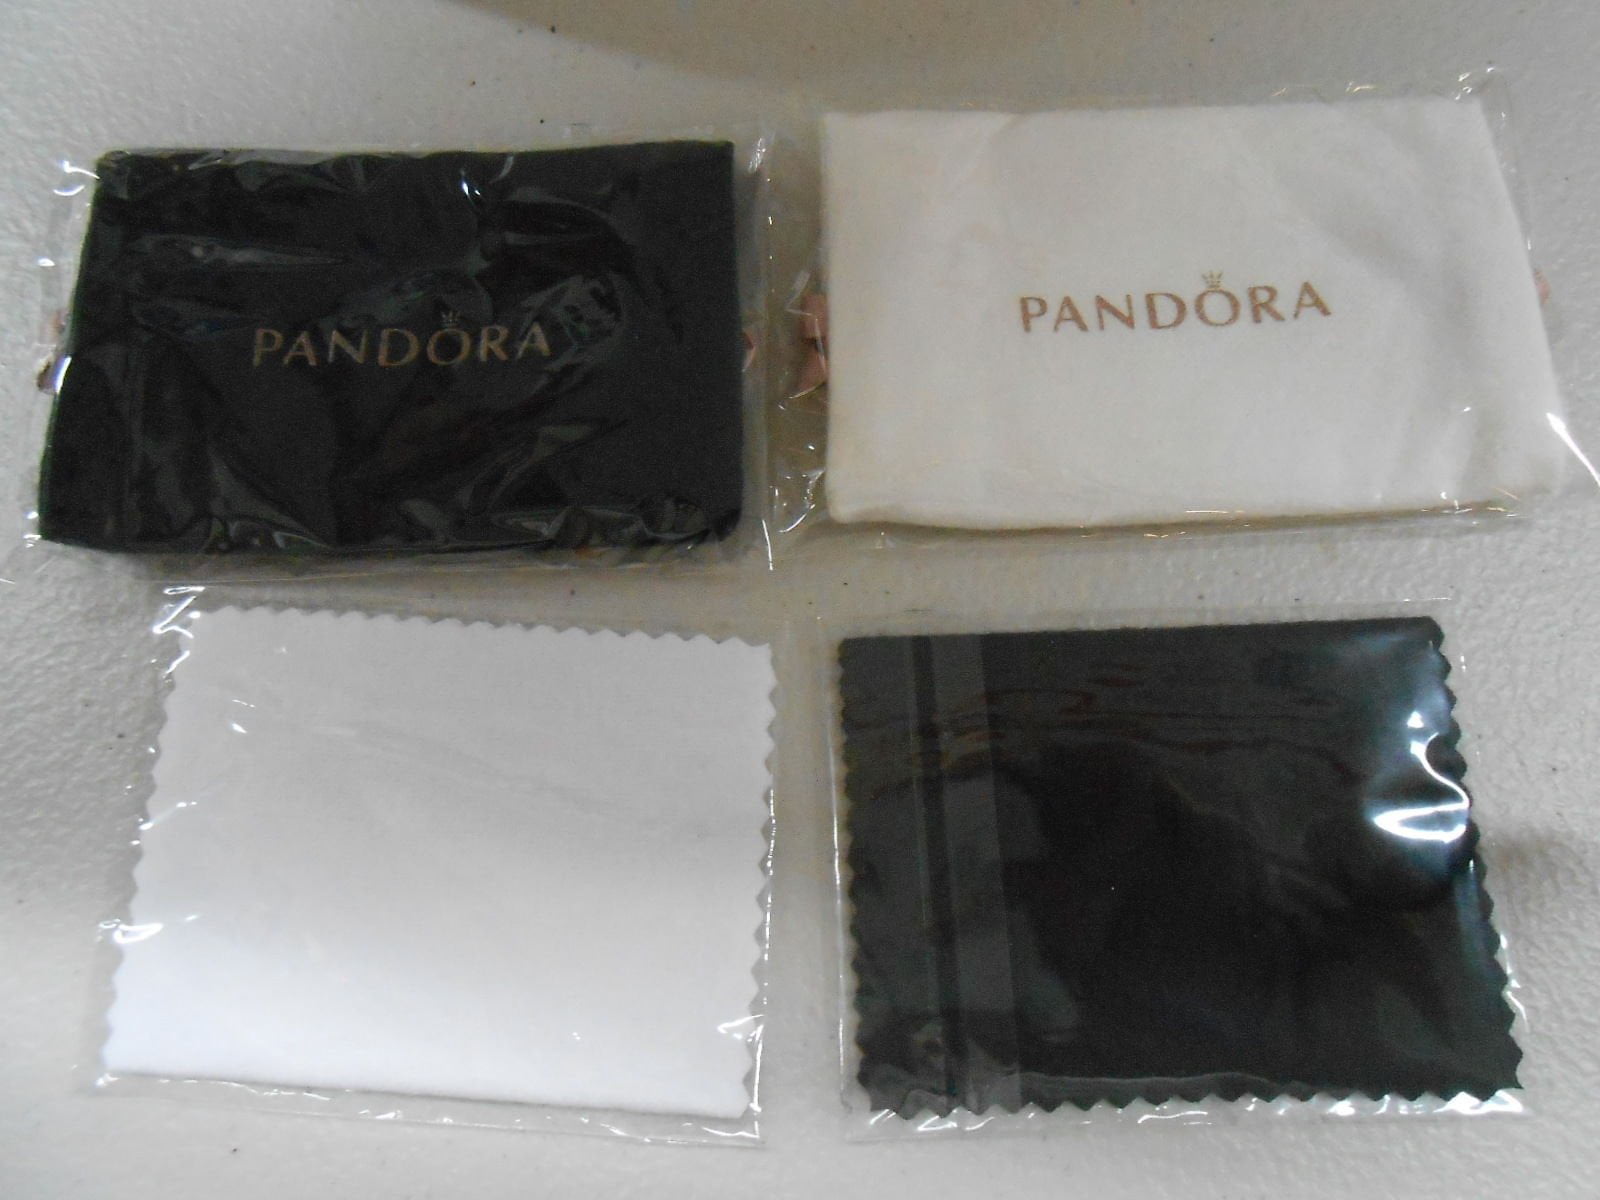 LOT:419  Pandora cleaning kit, with key ring and brush, two silver